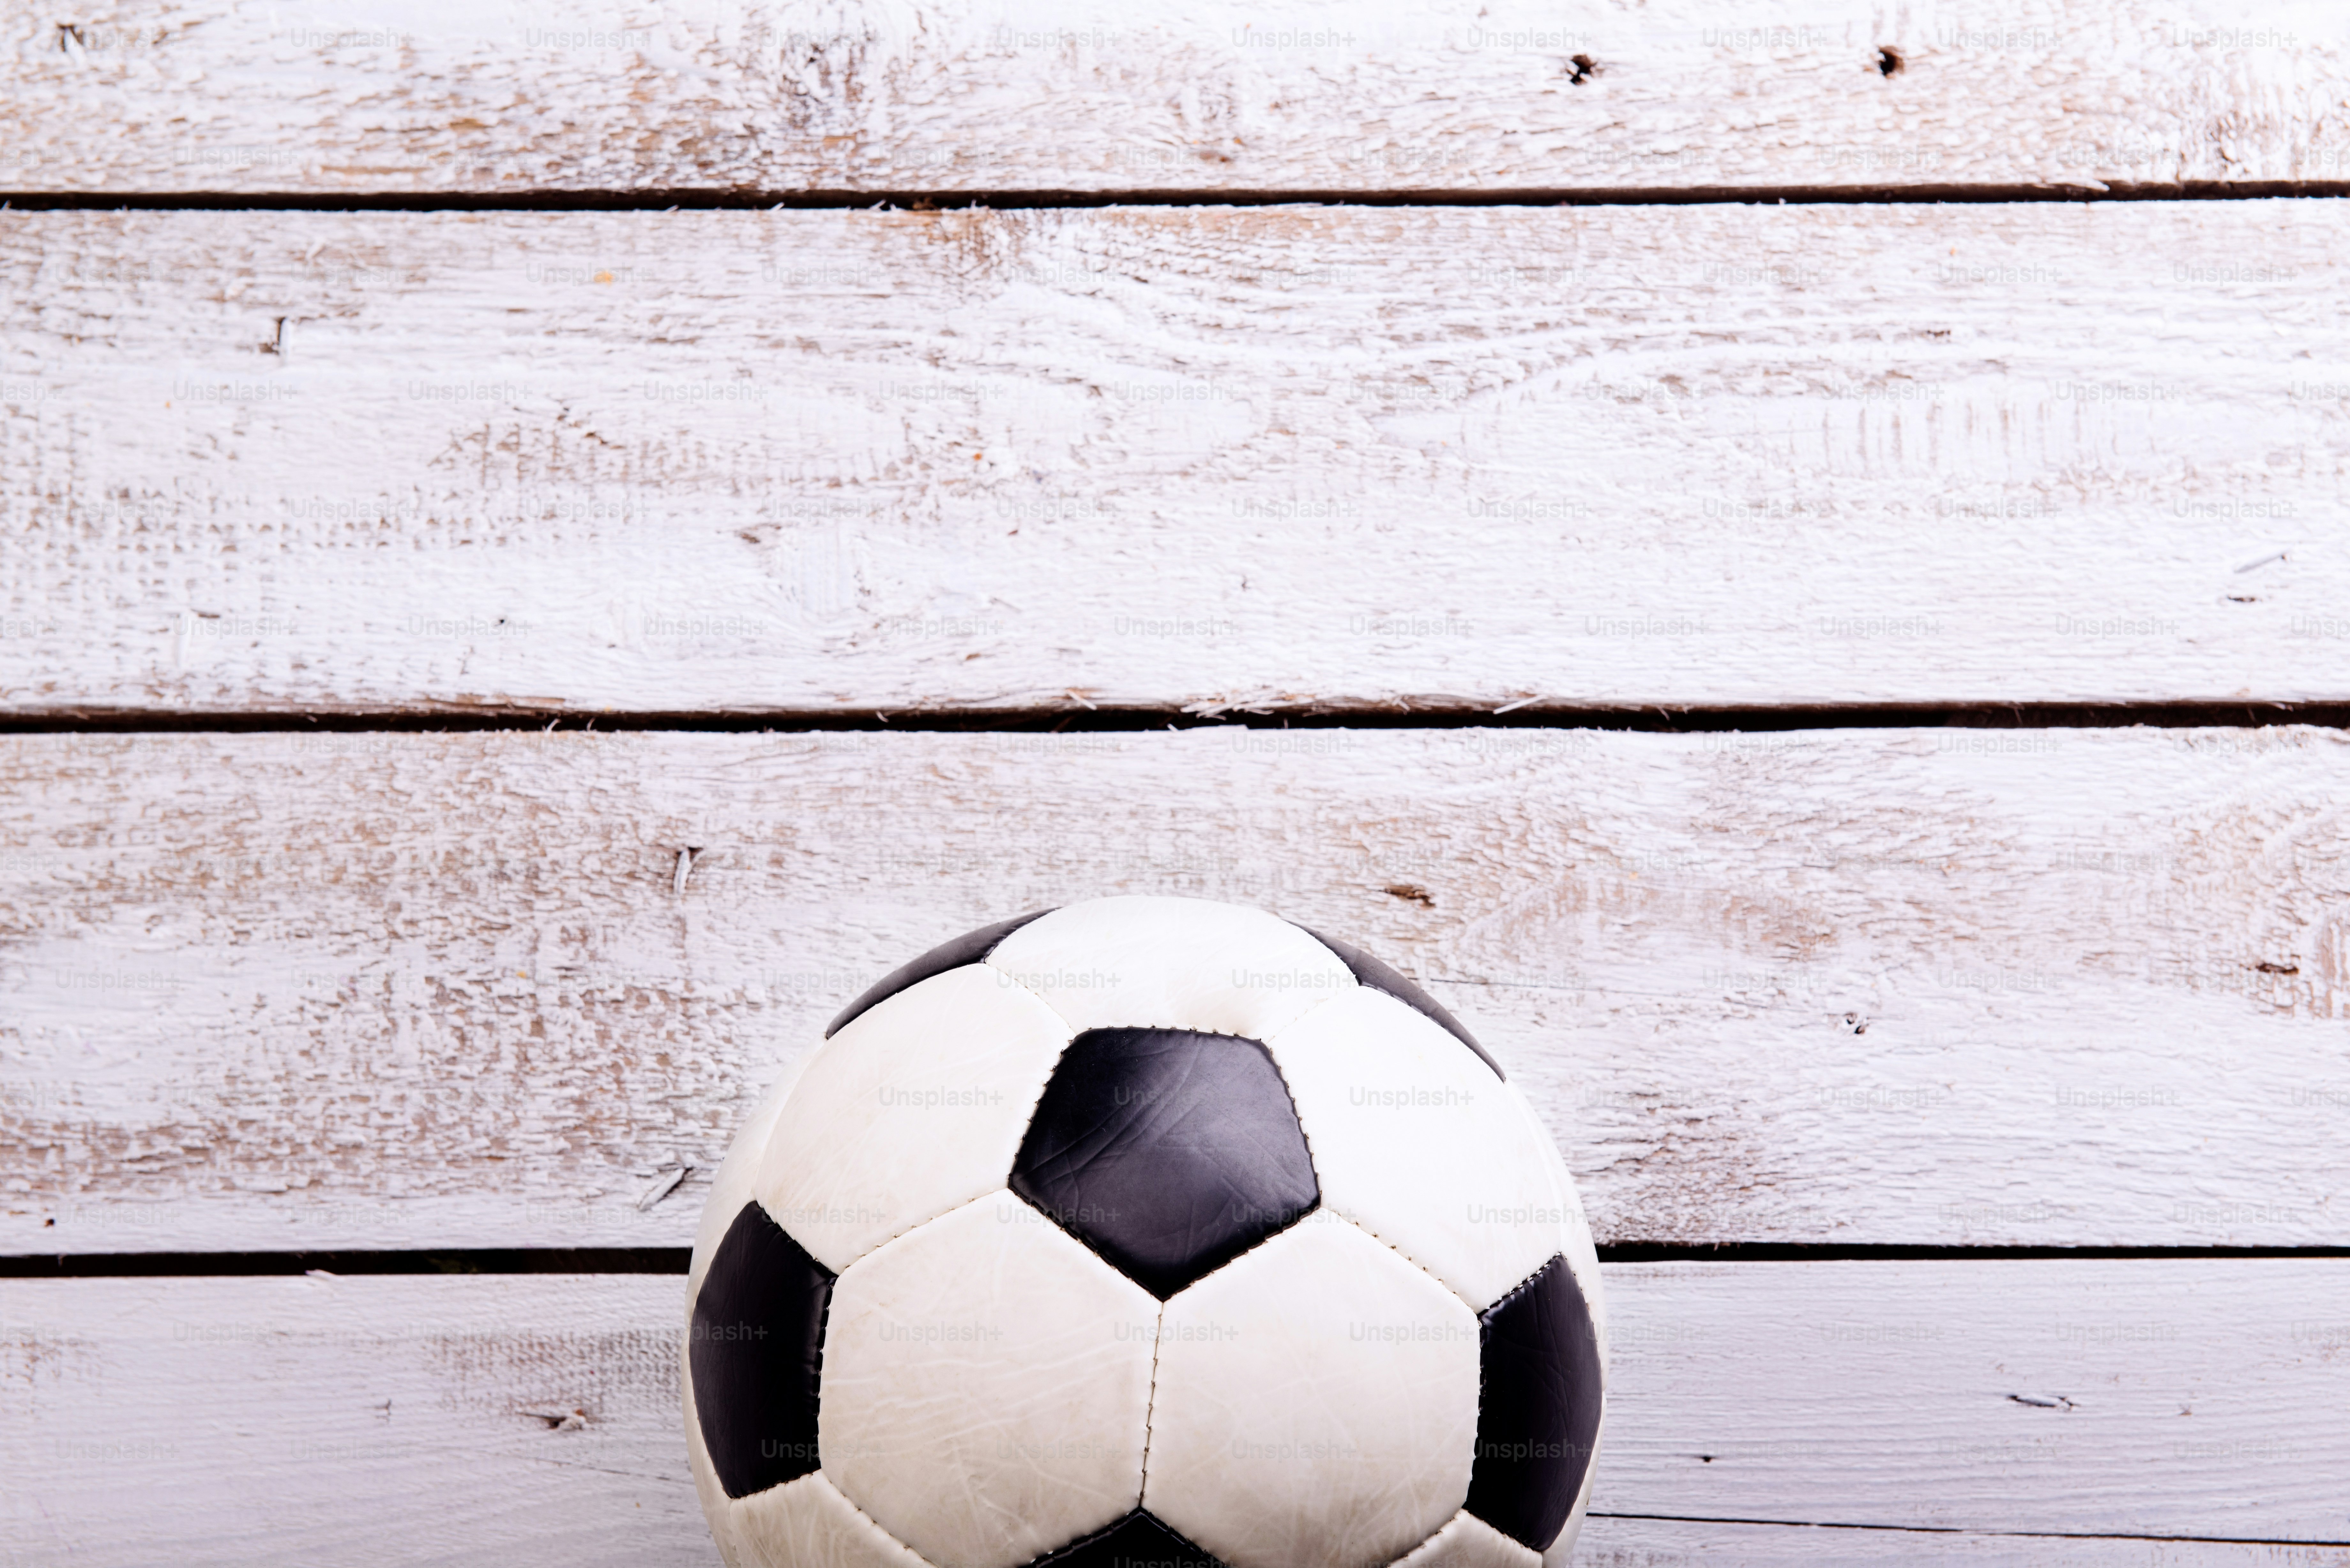 Choose from a curated selection of soccer ball photos. Always free on Unsplash.